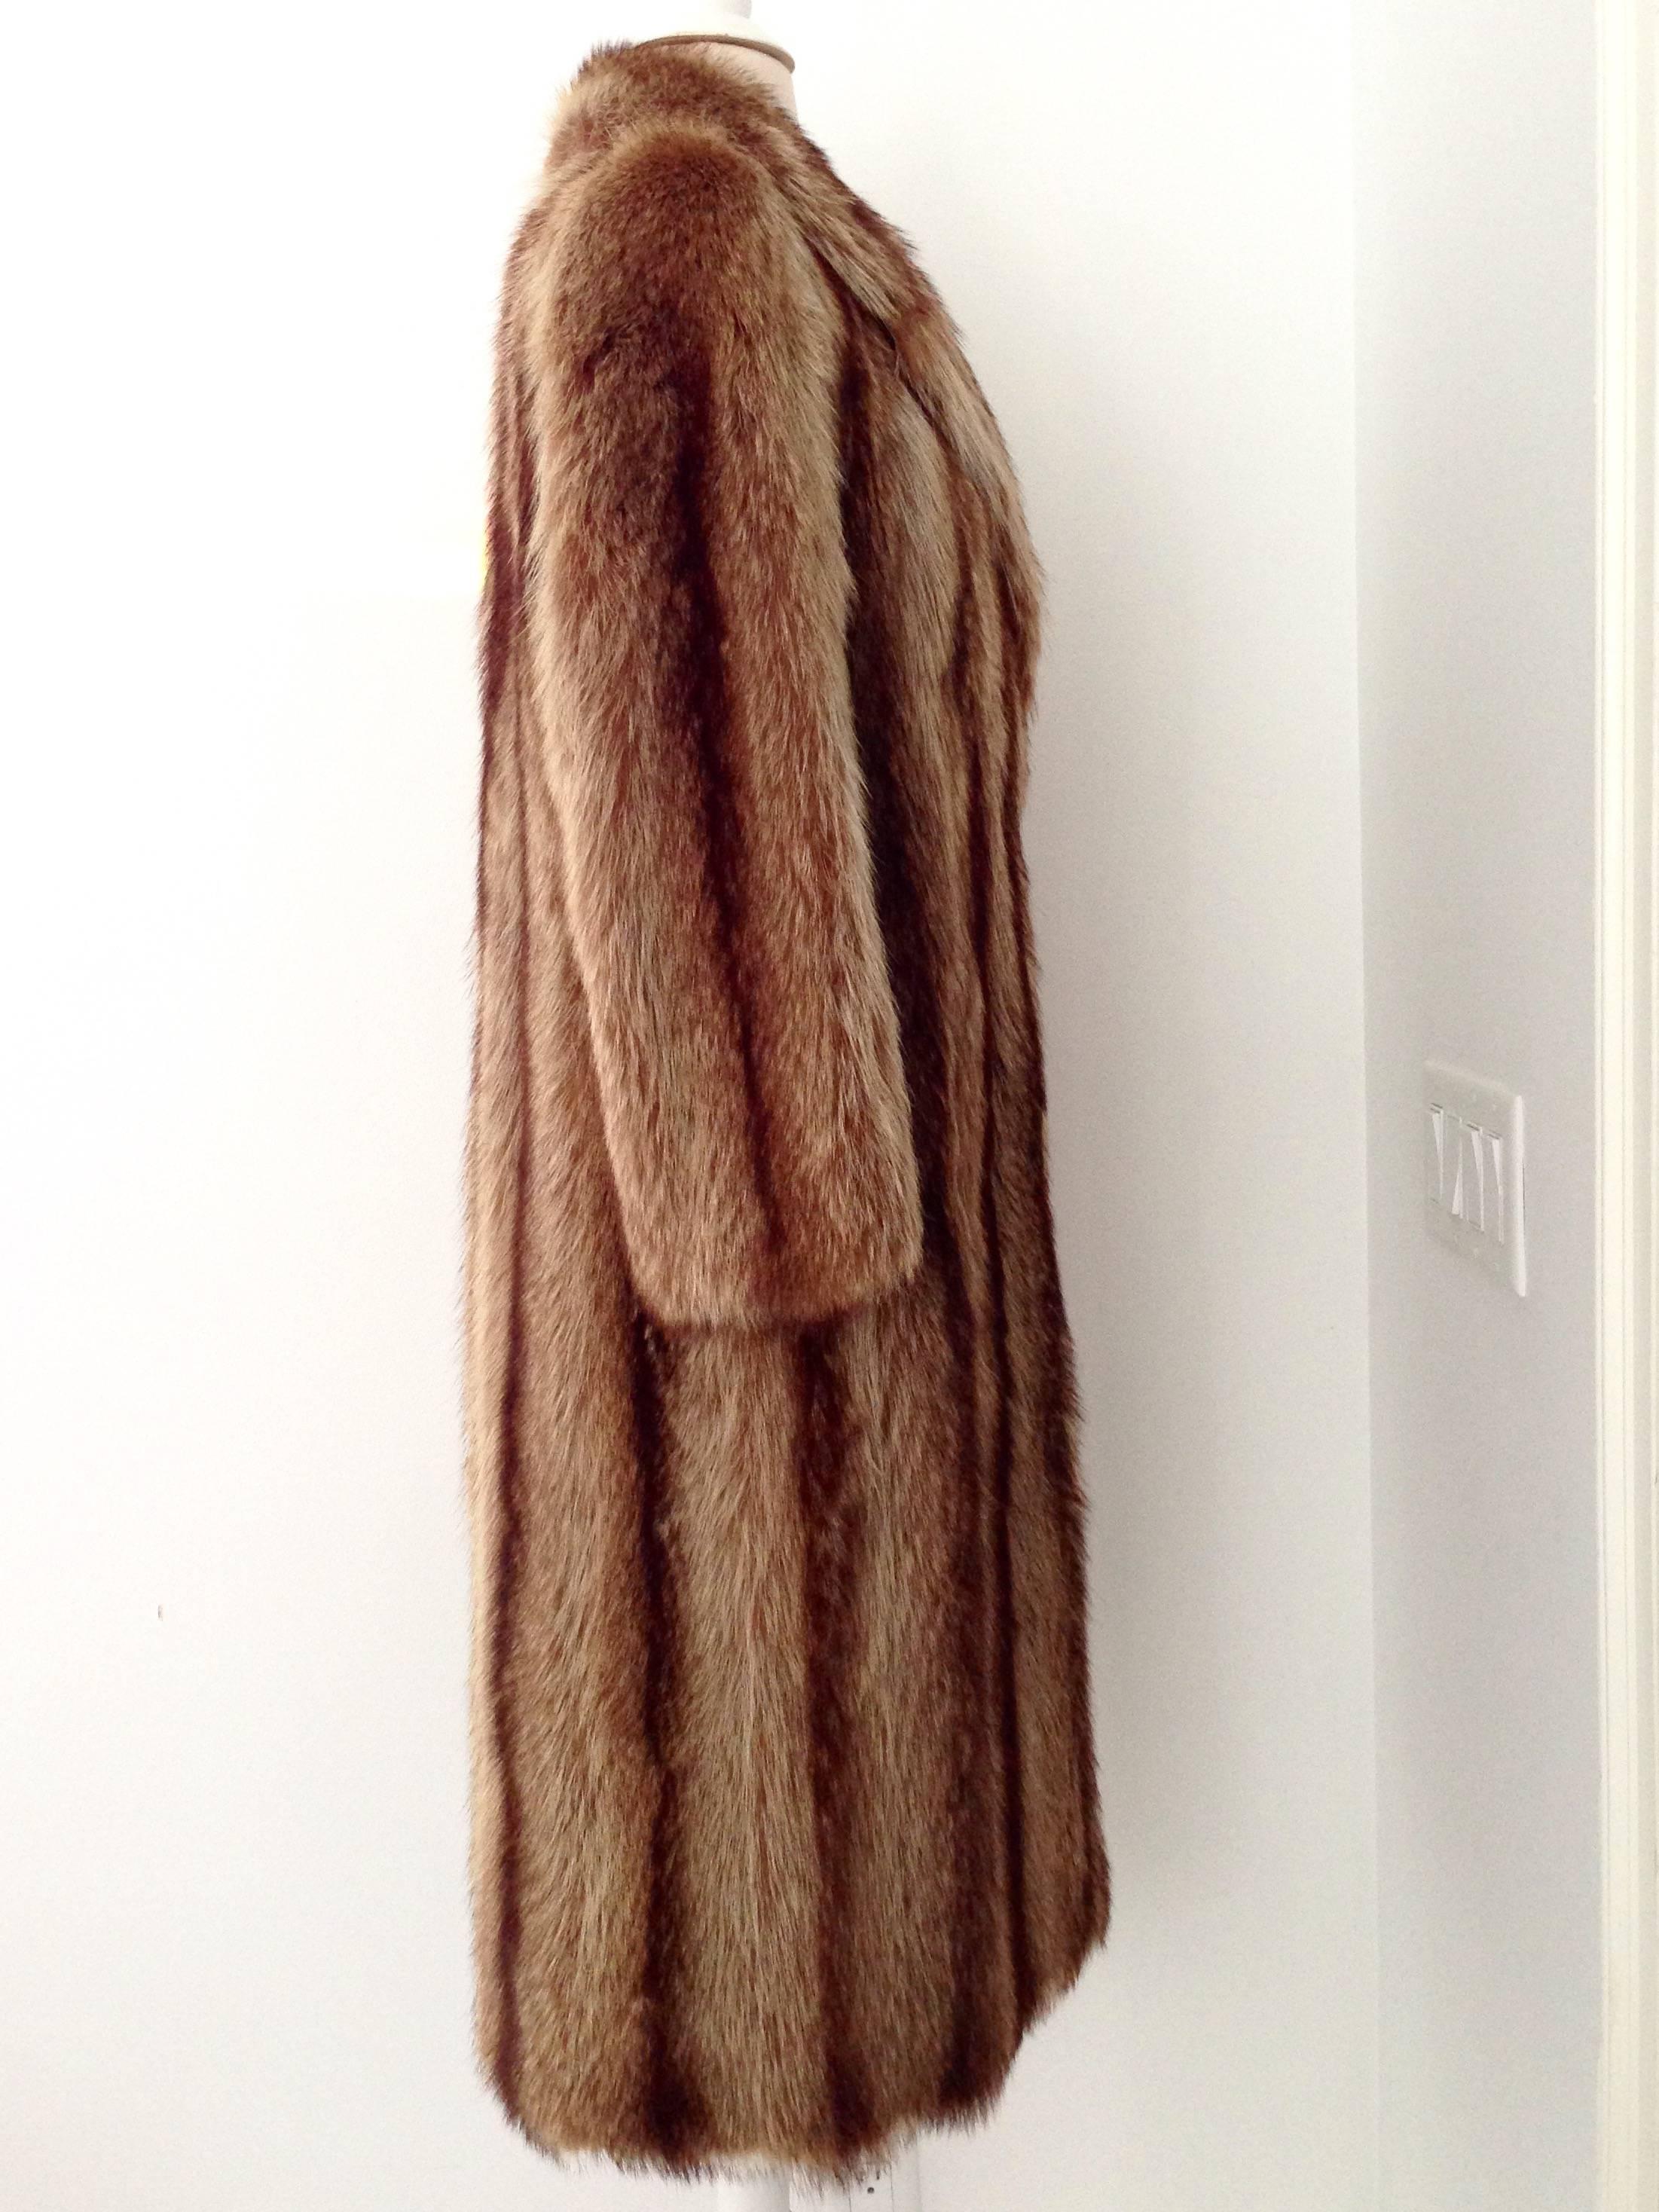 Chloe designer Raccoon fur coat for Goldin-Feldman furriers. Carmel and chocolate ombre in color, fully lined with and interior robe style belt and fringe bottom edge detail. Two-side pockets and one hook closure at chest. Chloe tag intact fits like